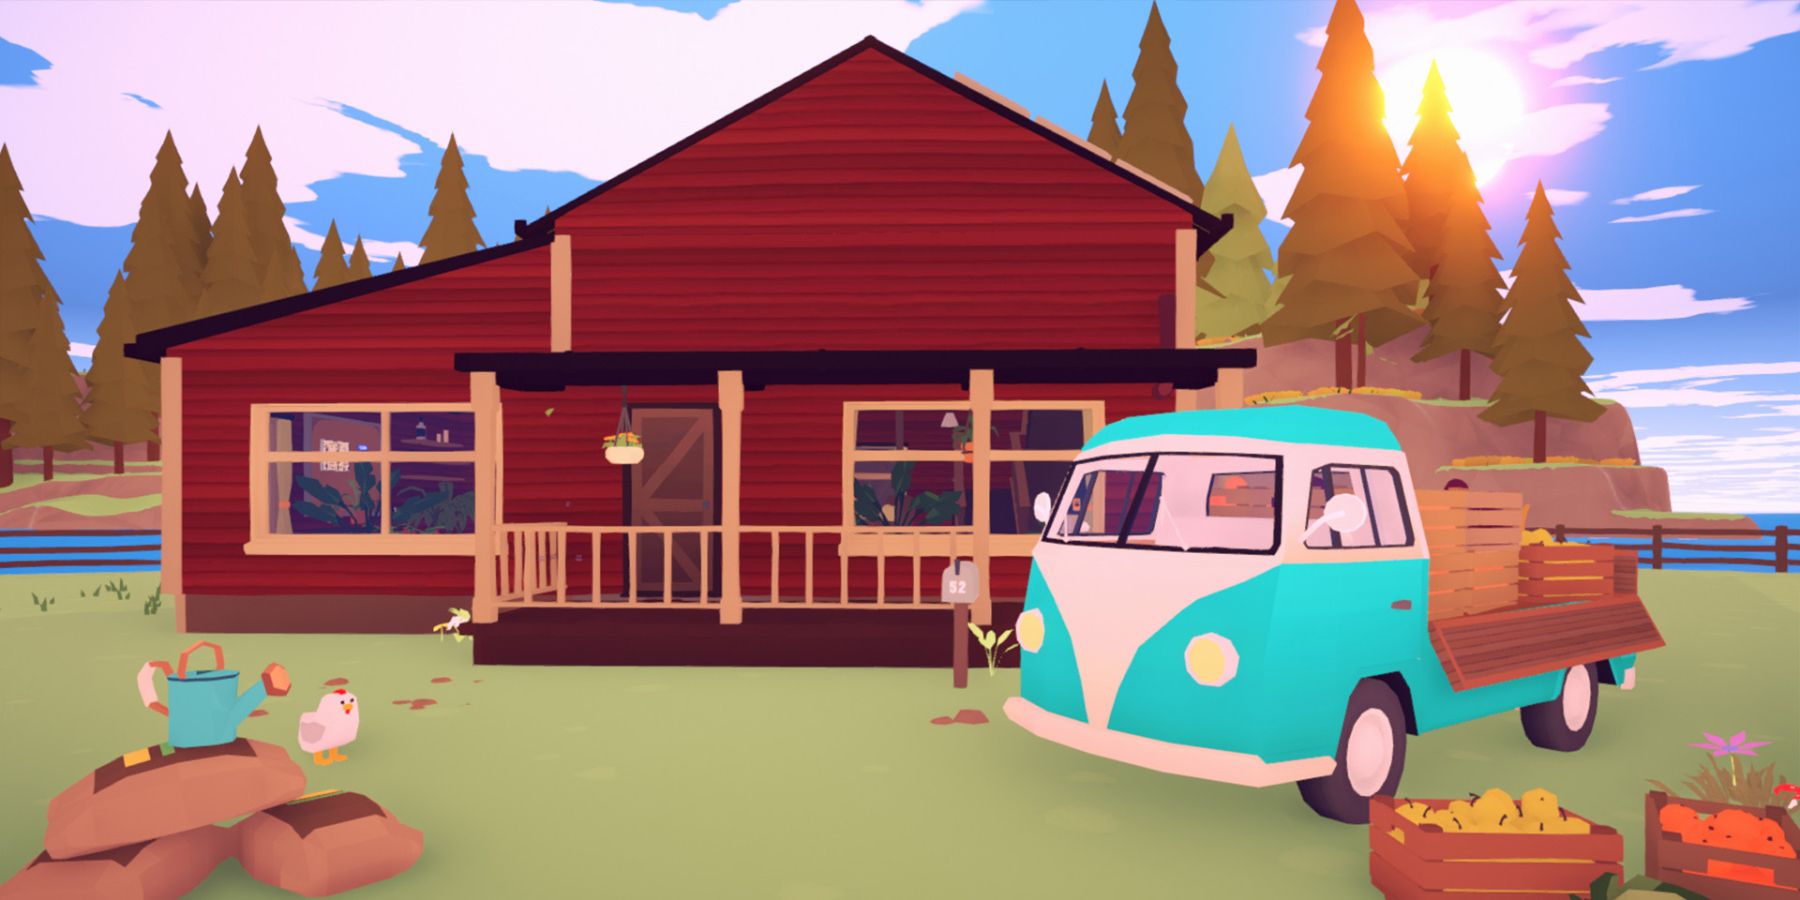 Lonefarm image showcasing the player's house and their van